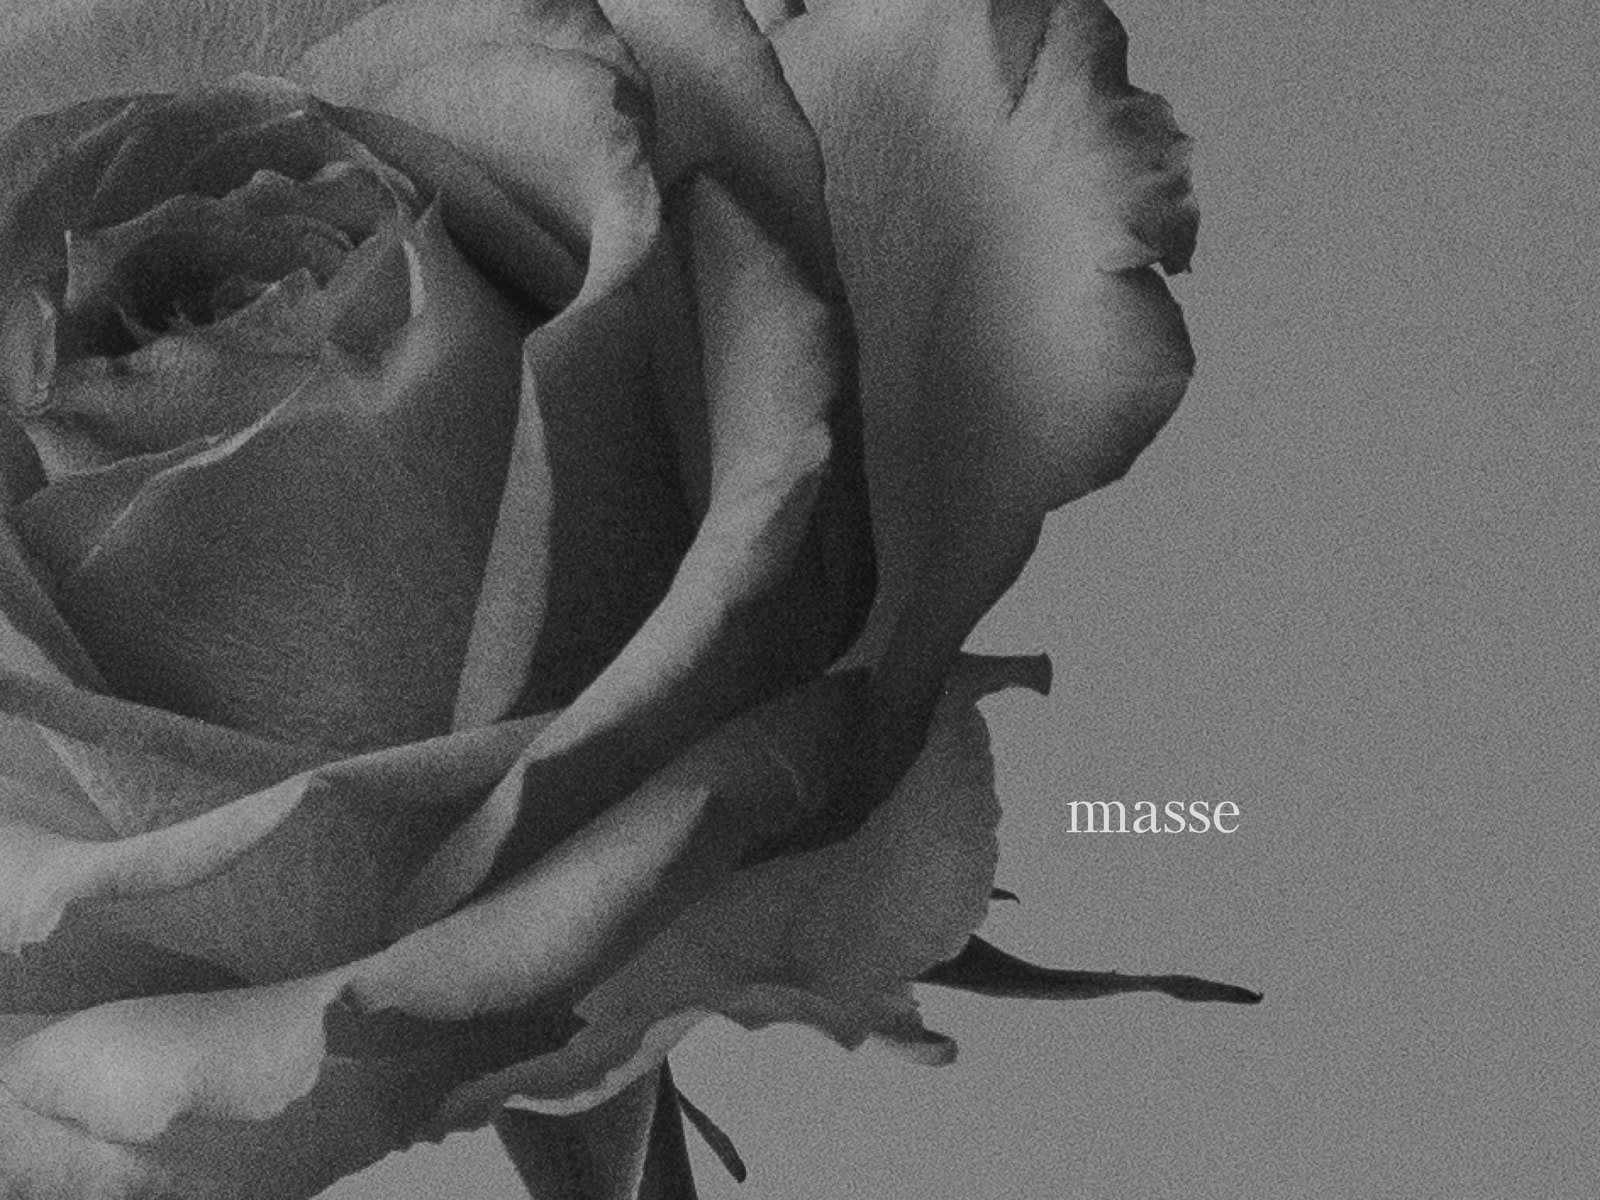 A greyscale close up of a rose with a logotype that says "masse". The image is grainy and noisy, but minimalistic. by Sydney SG